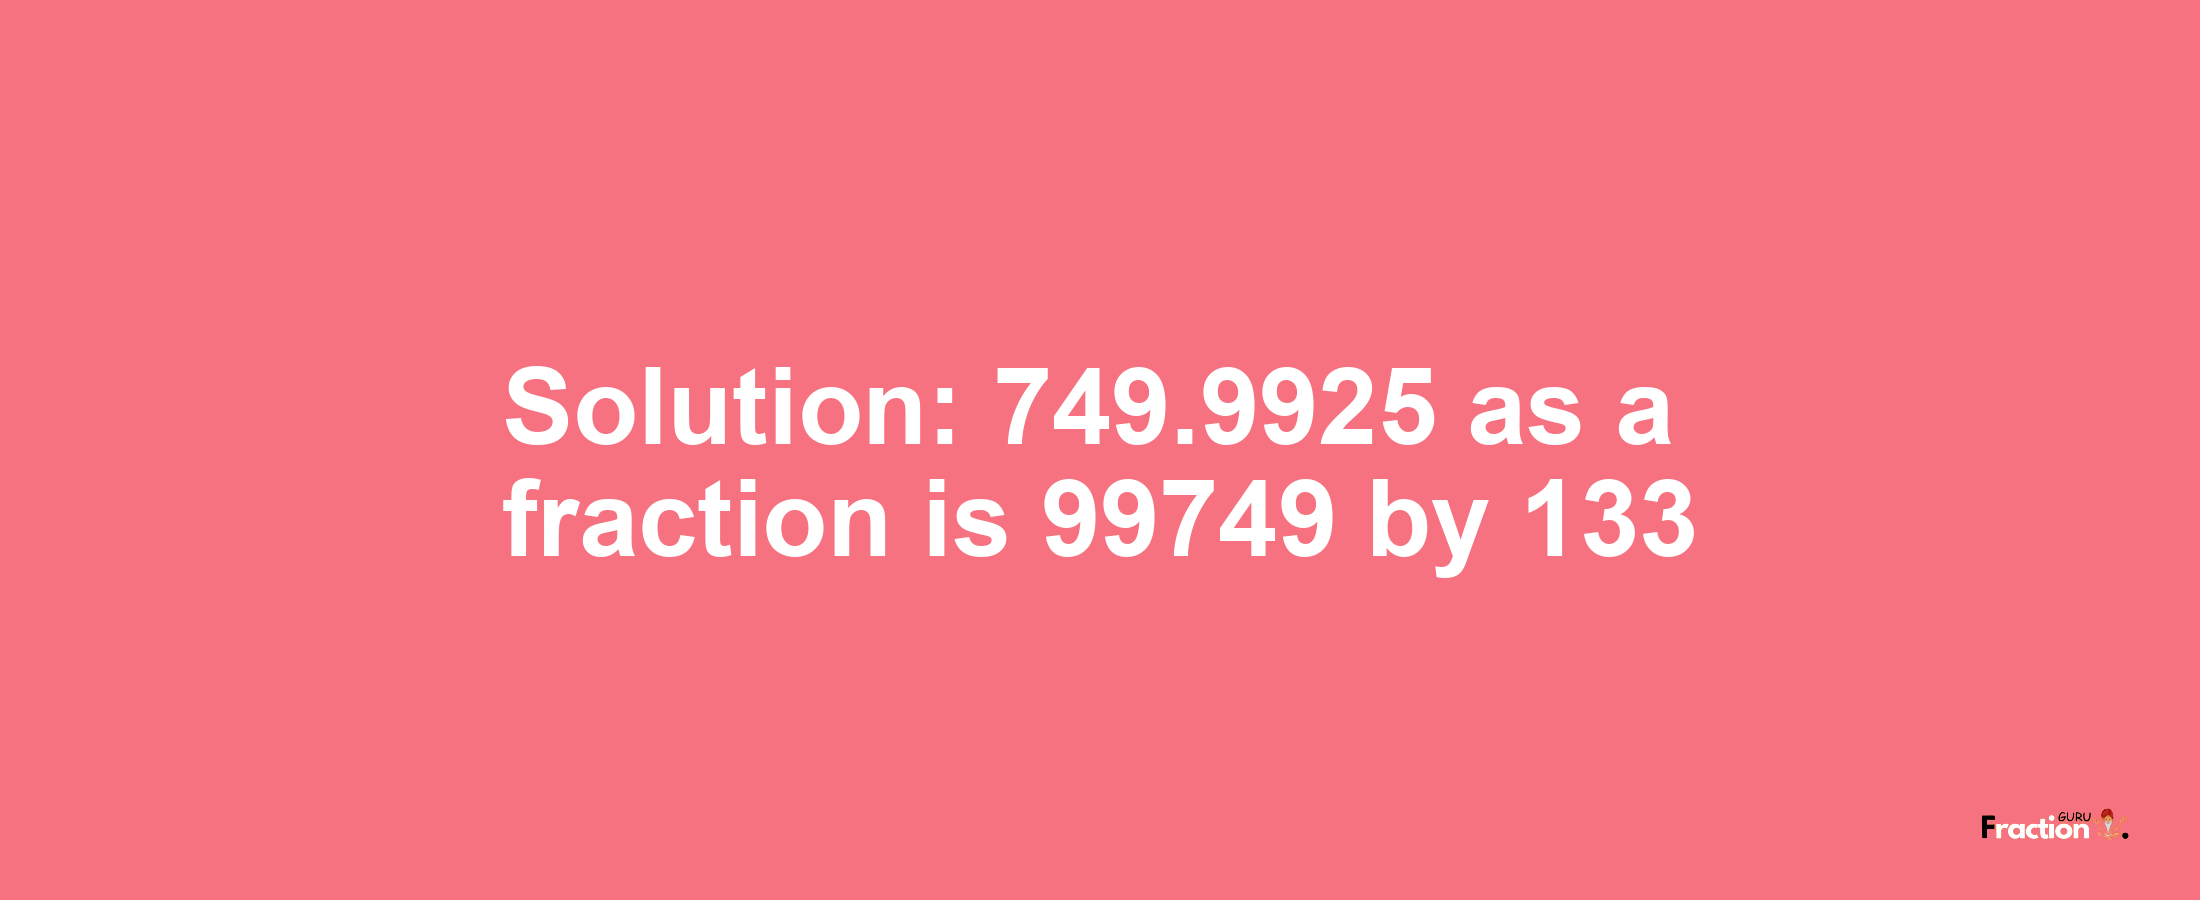 Solution:749.9925 as a fraction is 99749/133